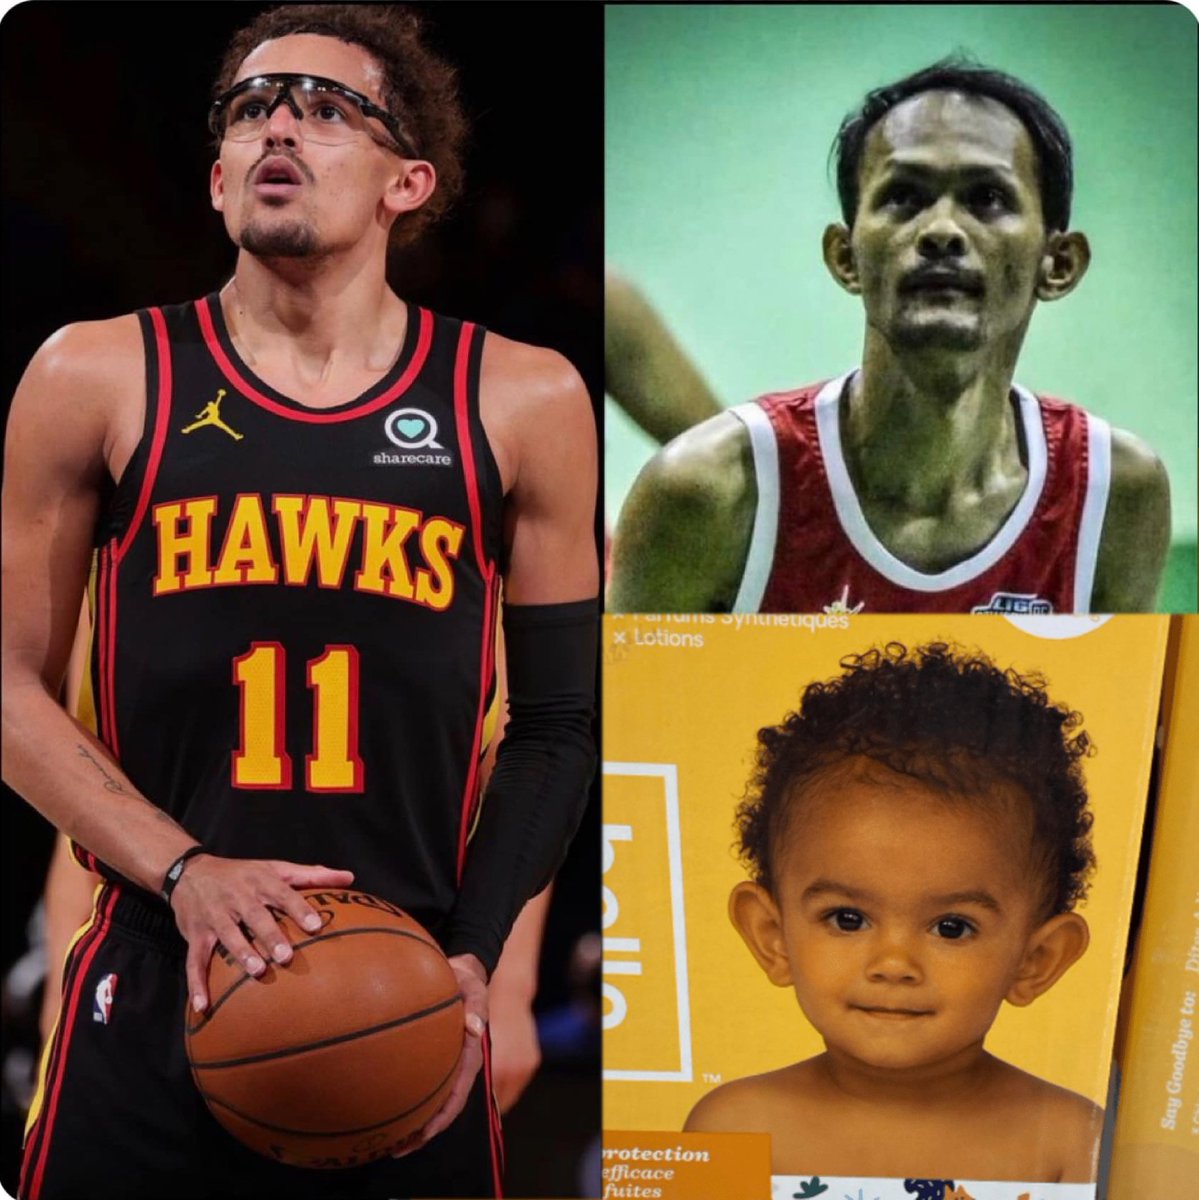 RT @NBAMemes: Trae Young X Trae Old X Trae Infant https://t.co/CYcFyIrnum